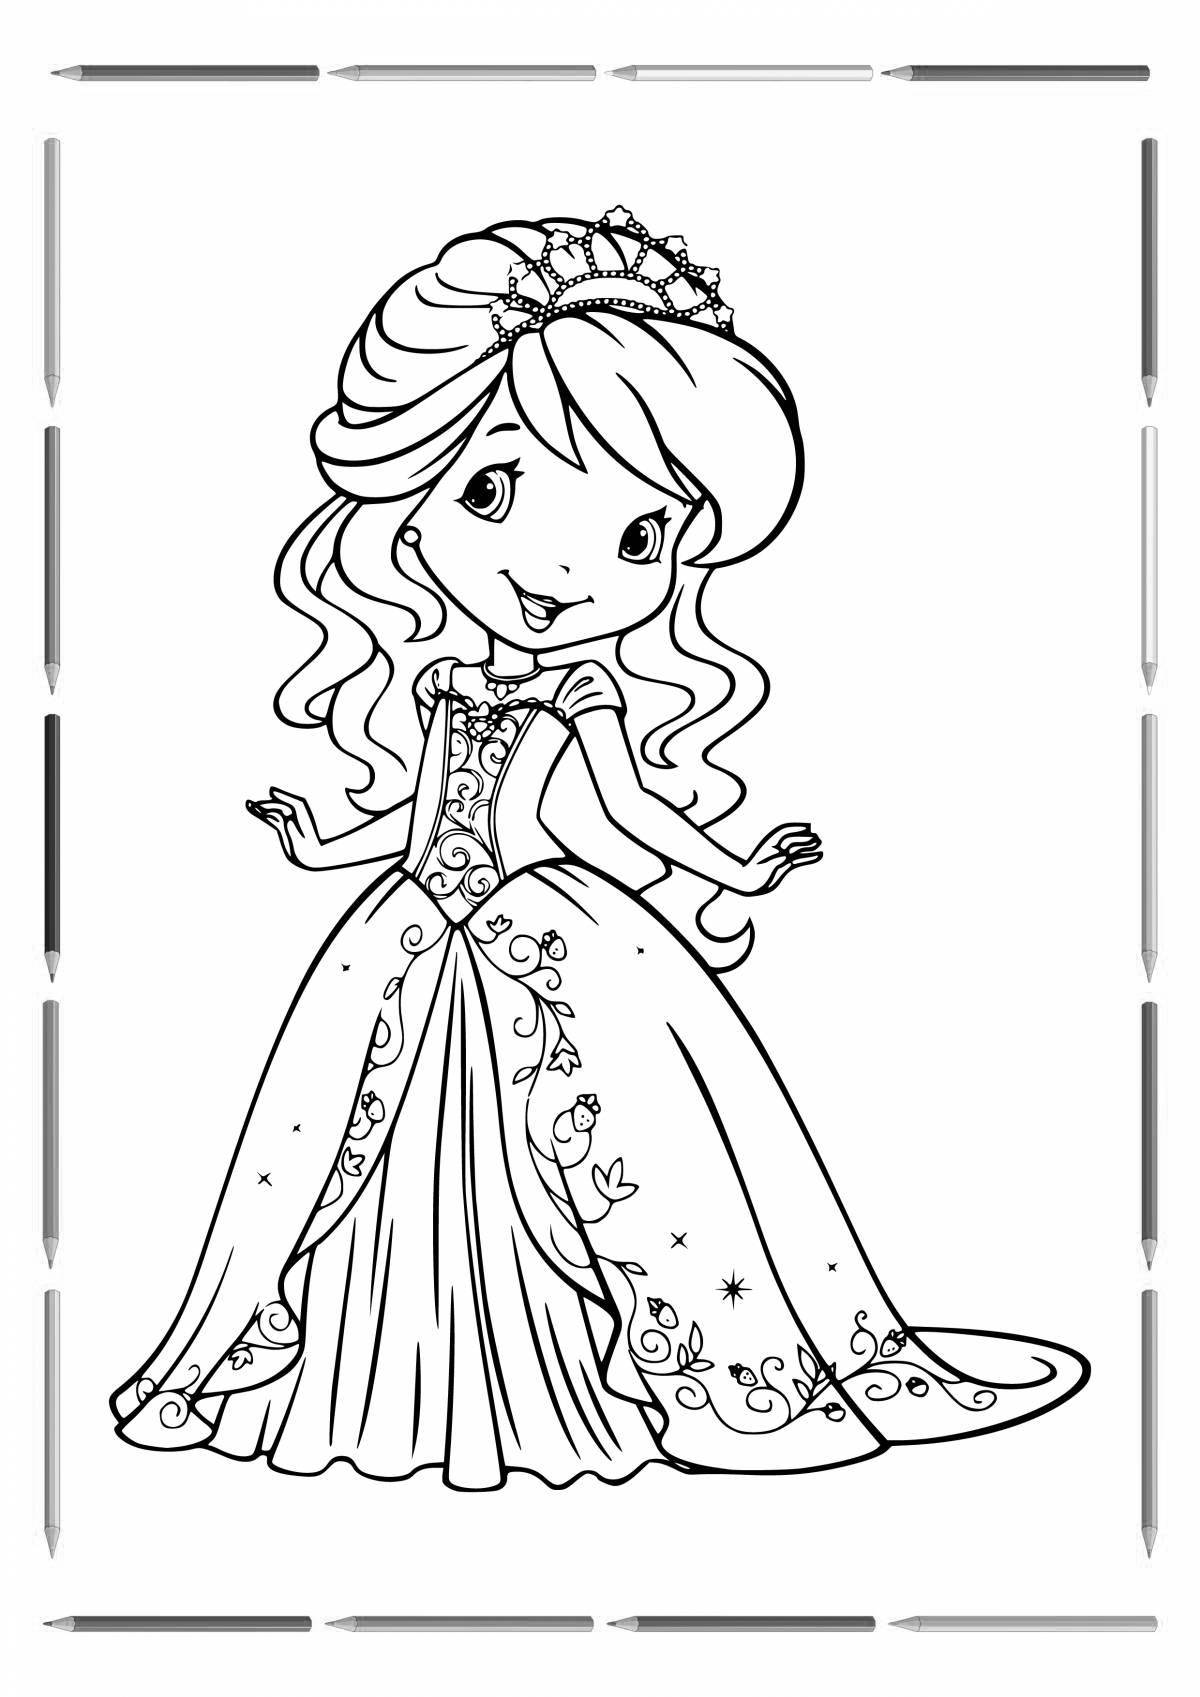 Exquisite coloring book for girls